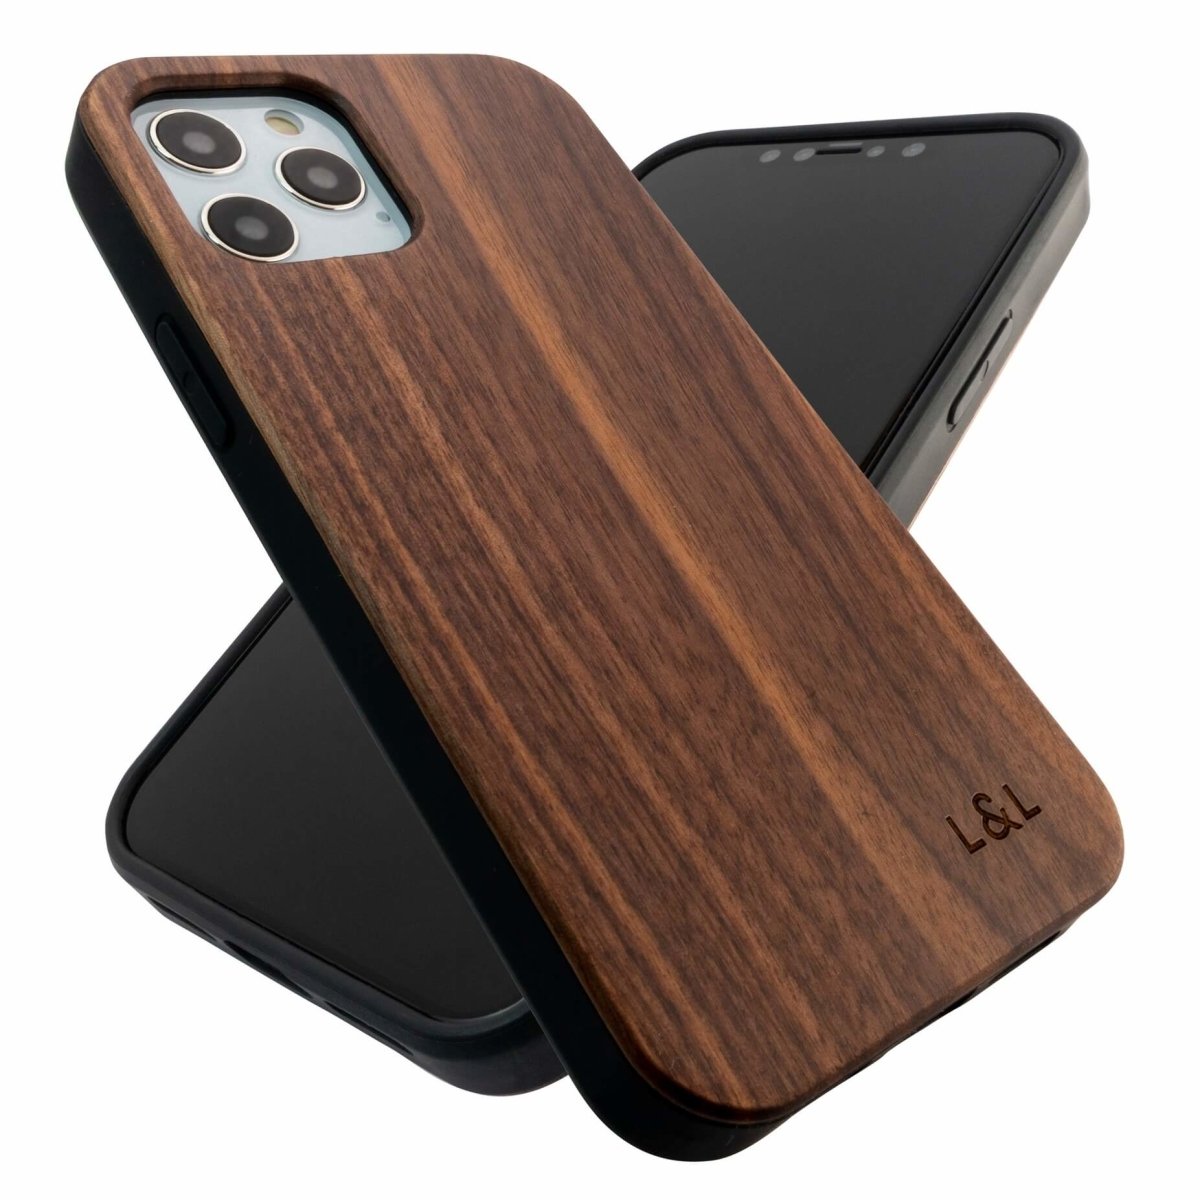 Walnut iPhone 12 Case with Eco-Friendly Shell - Loam & Lore